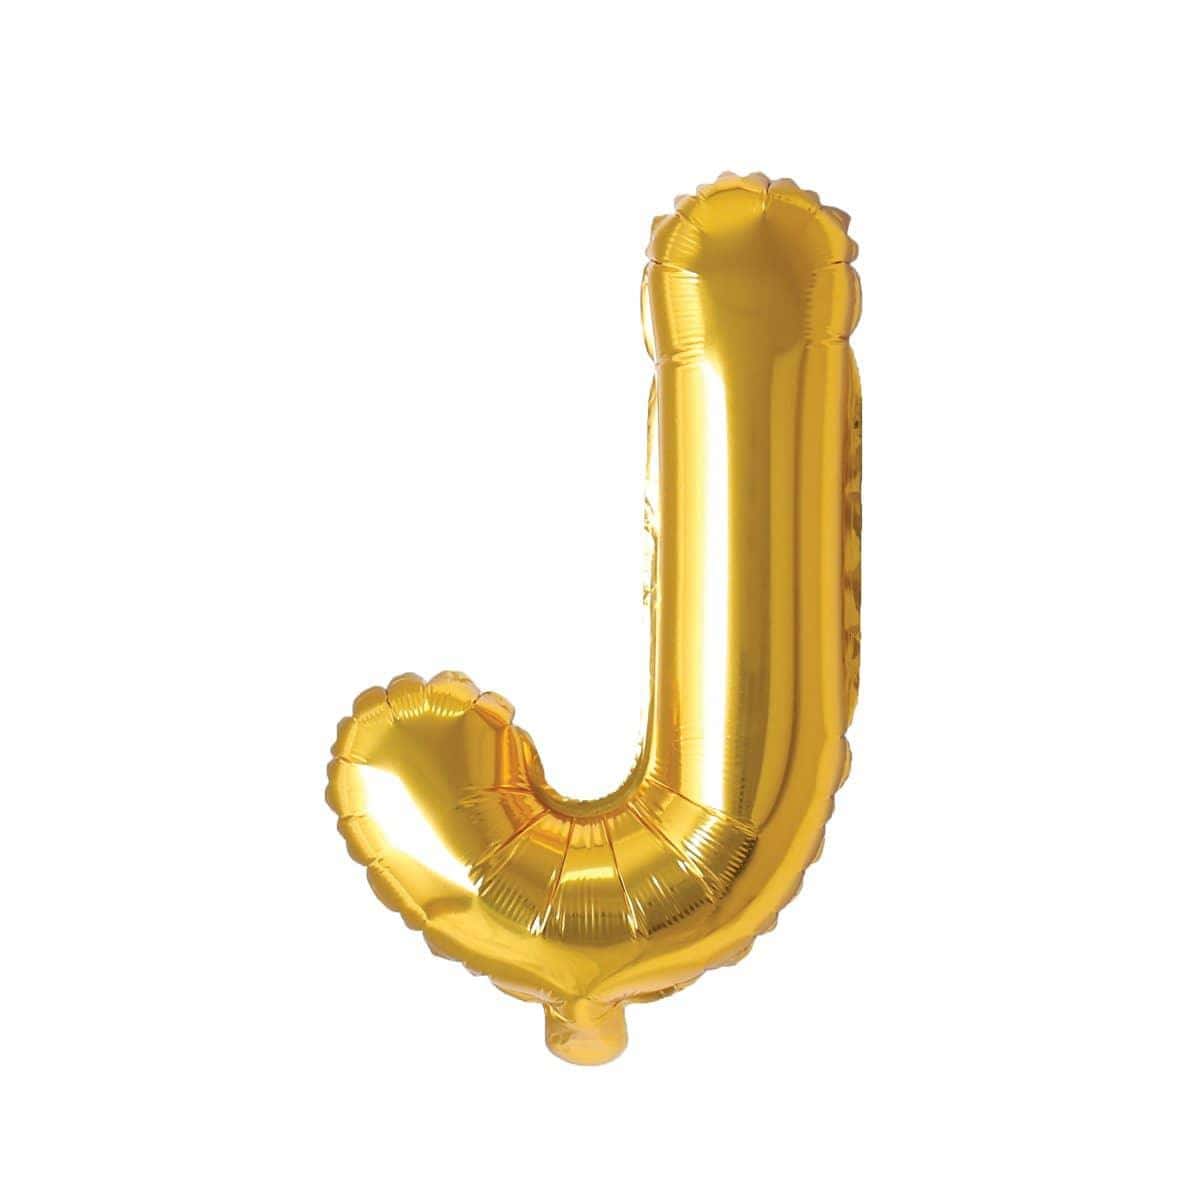 Buy Balloons Gold Letter J Foil Balloon, 16 Inches sold at Party Expert